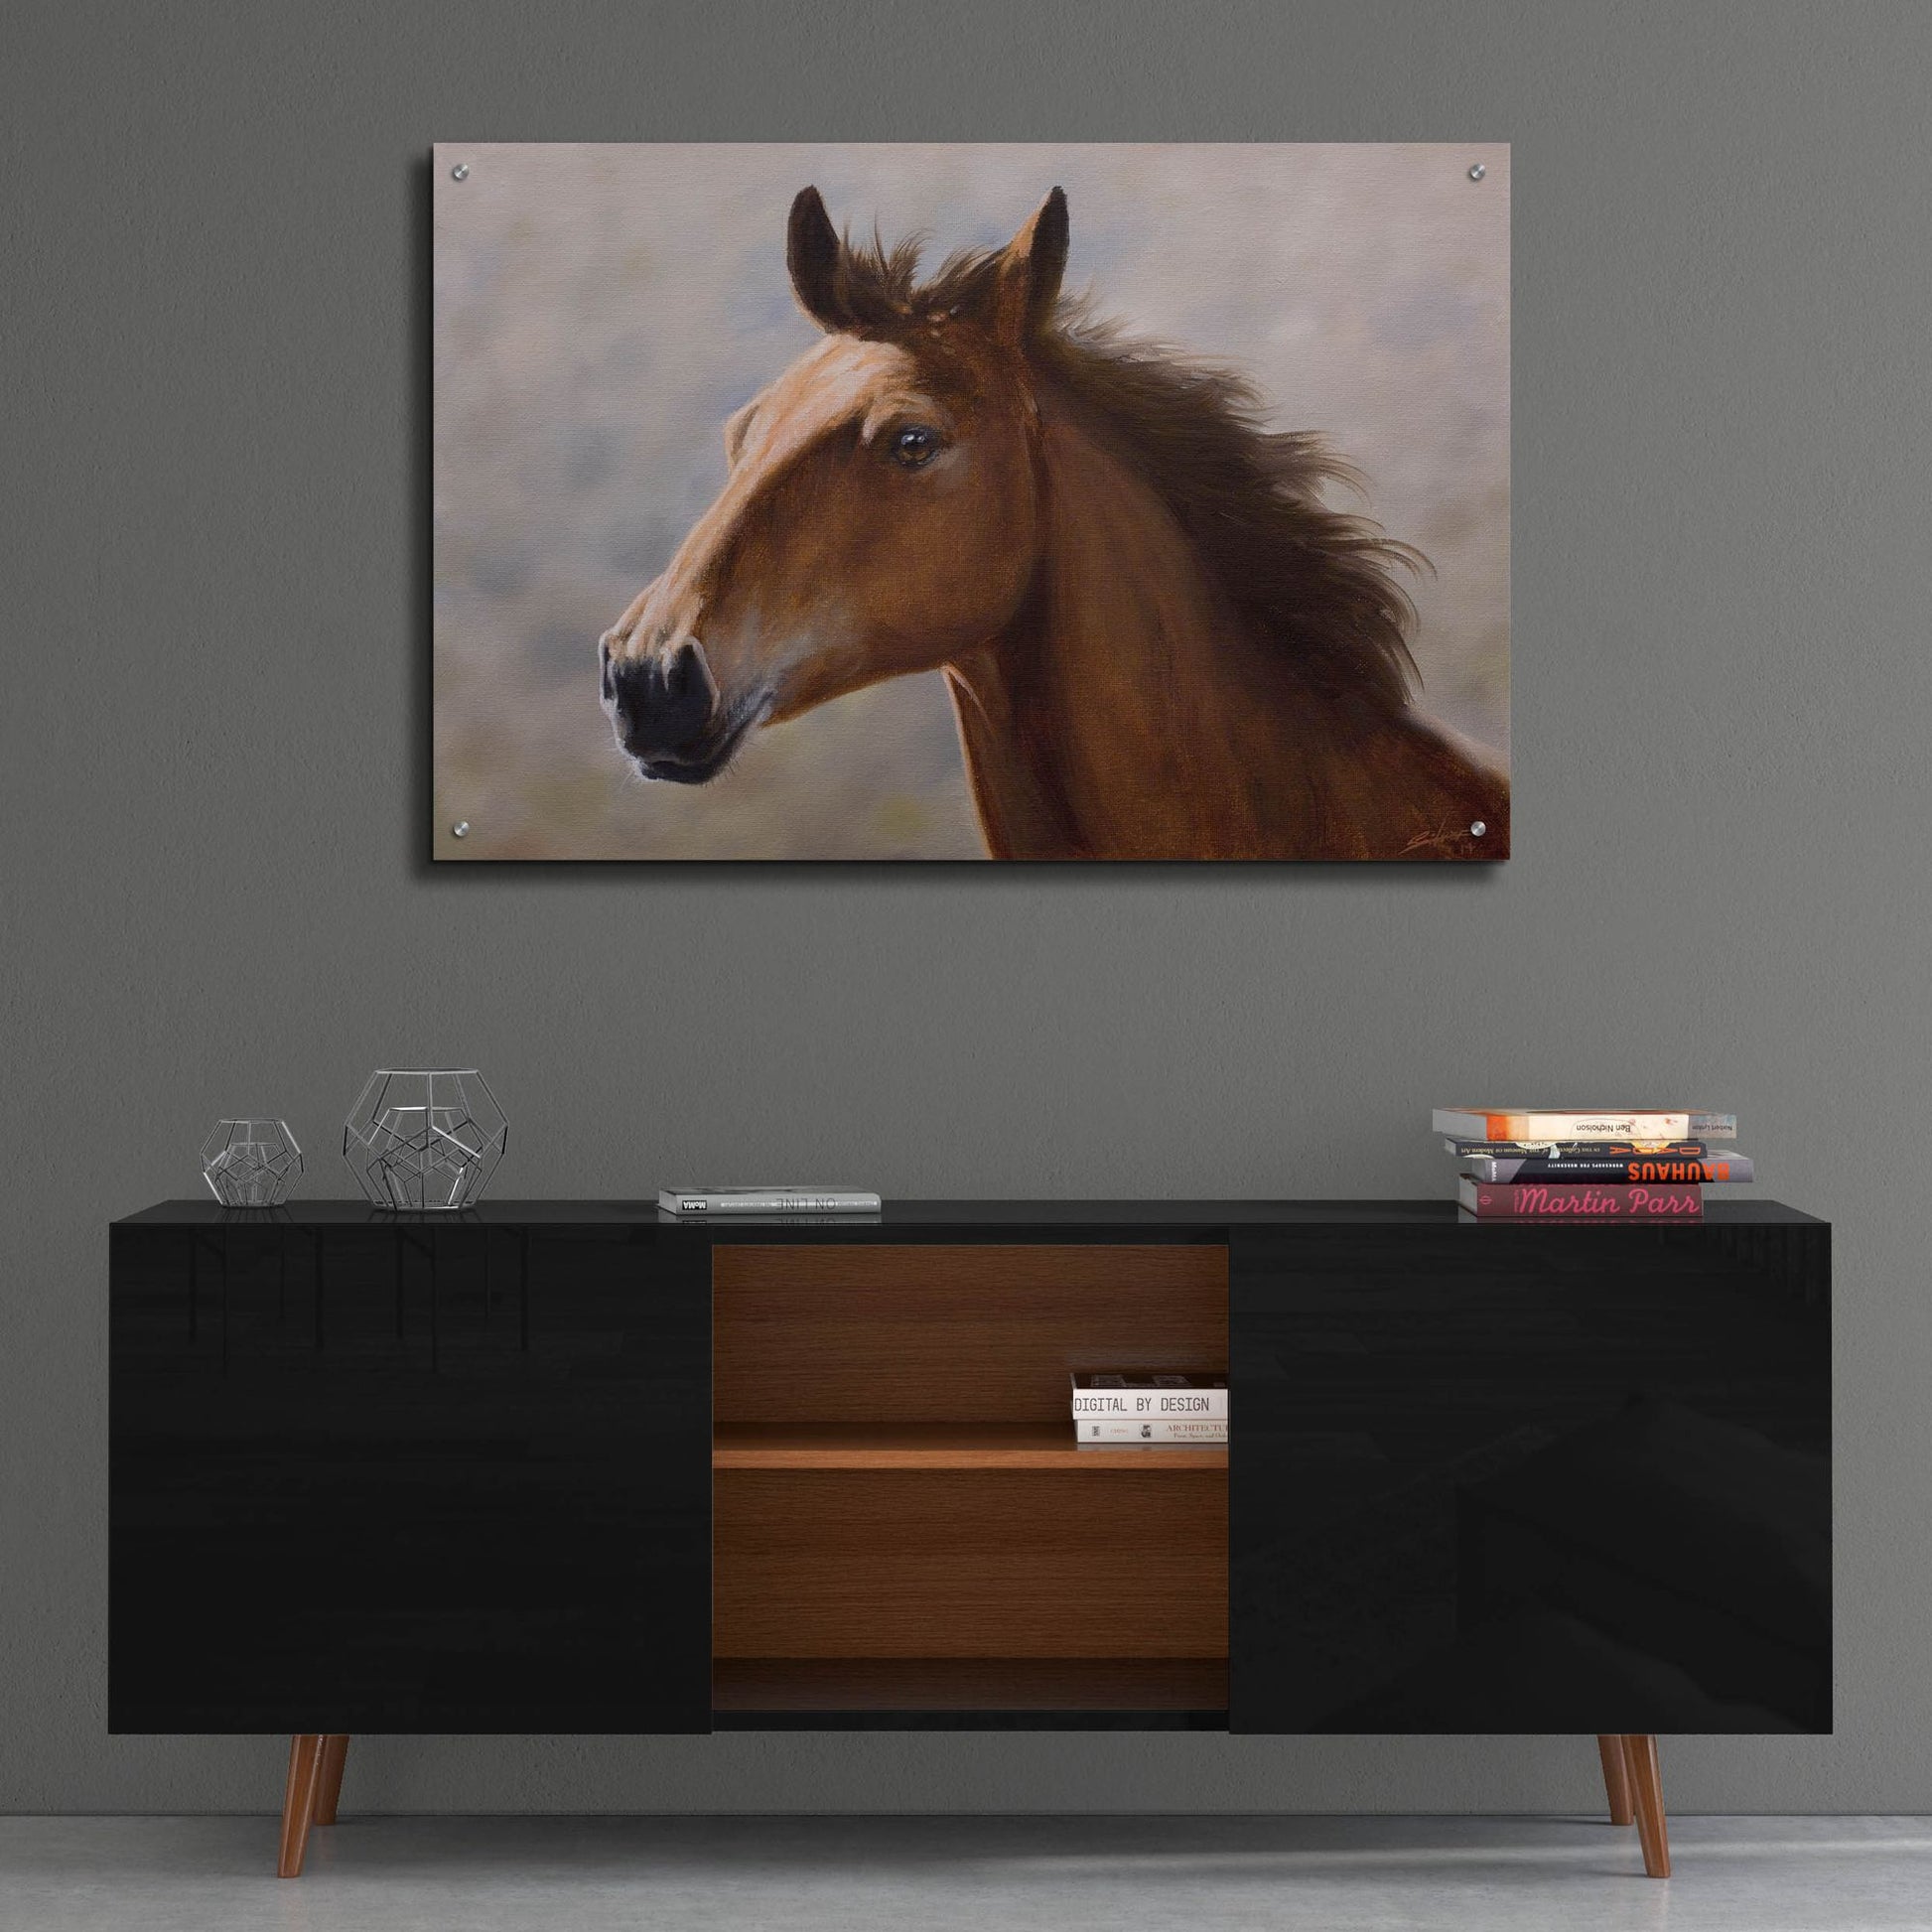 Epic Art 'Horse Thoughts' by John Silver, Acrylic Glass Wall Art,36x24